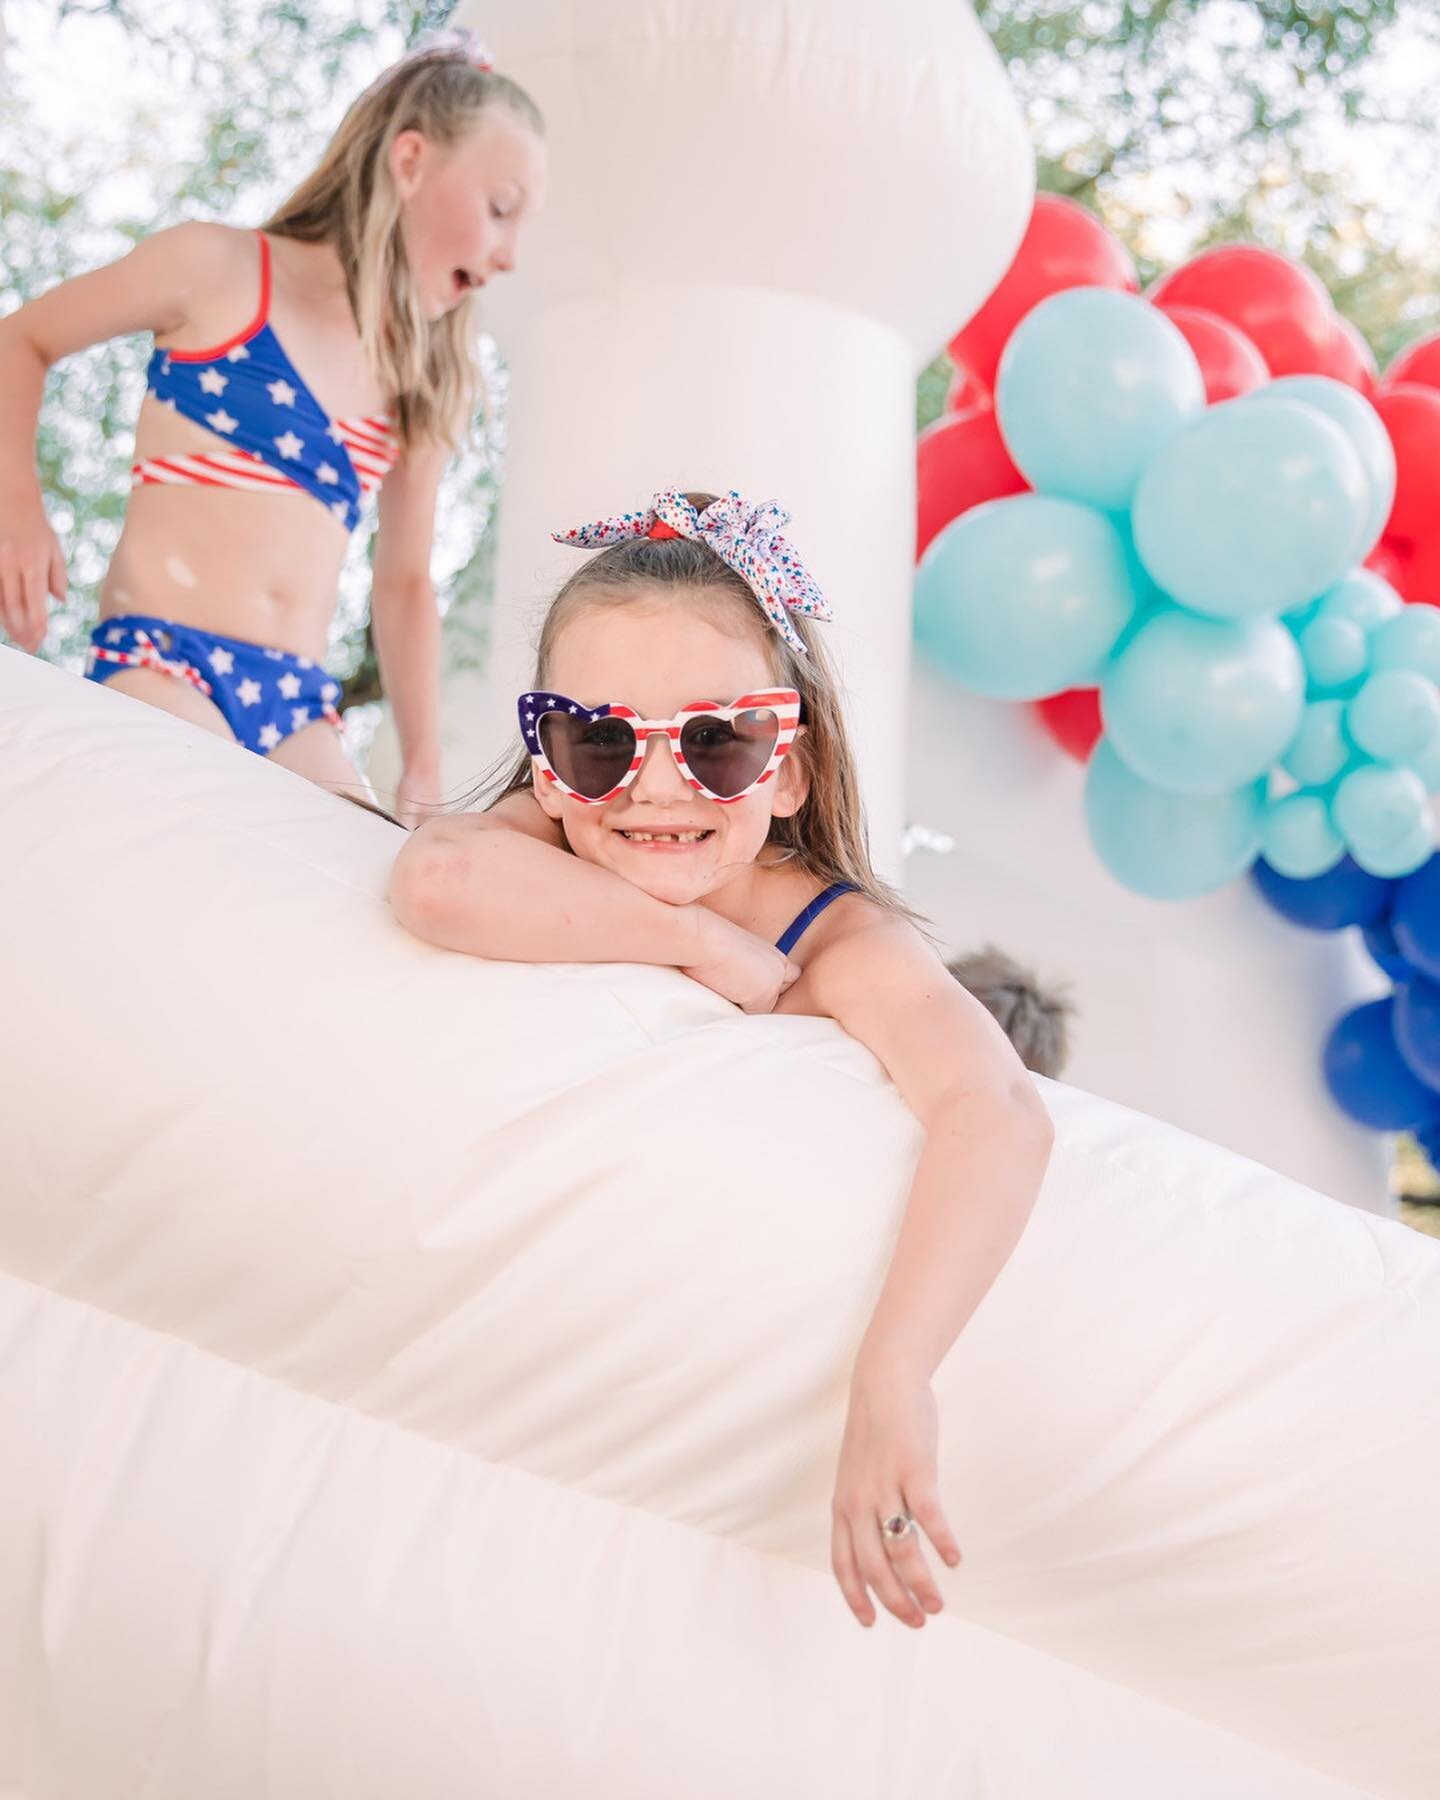 Looking for the ultimate Independence Day celebration? These adorable kids have got it all figured out! 🎉🇺🇸 We're here for it!!! Let us add a splash of excitement to your USA festivities this July 4th! 💥
⠀⠀⠀⠀⠀⠀⠀⠀⠀
Balloons &amp; Soft Play: @a.swe